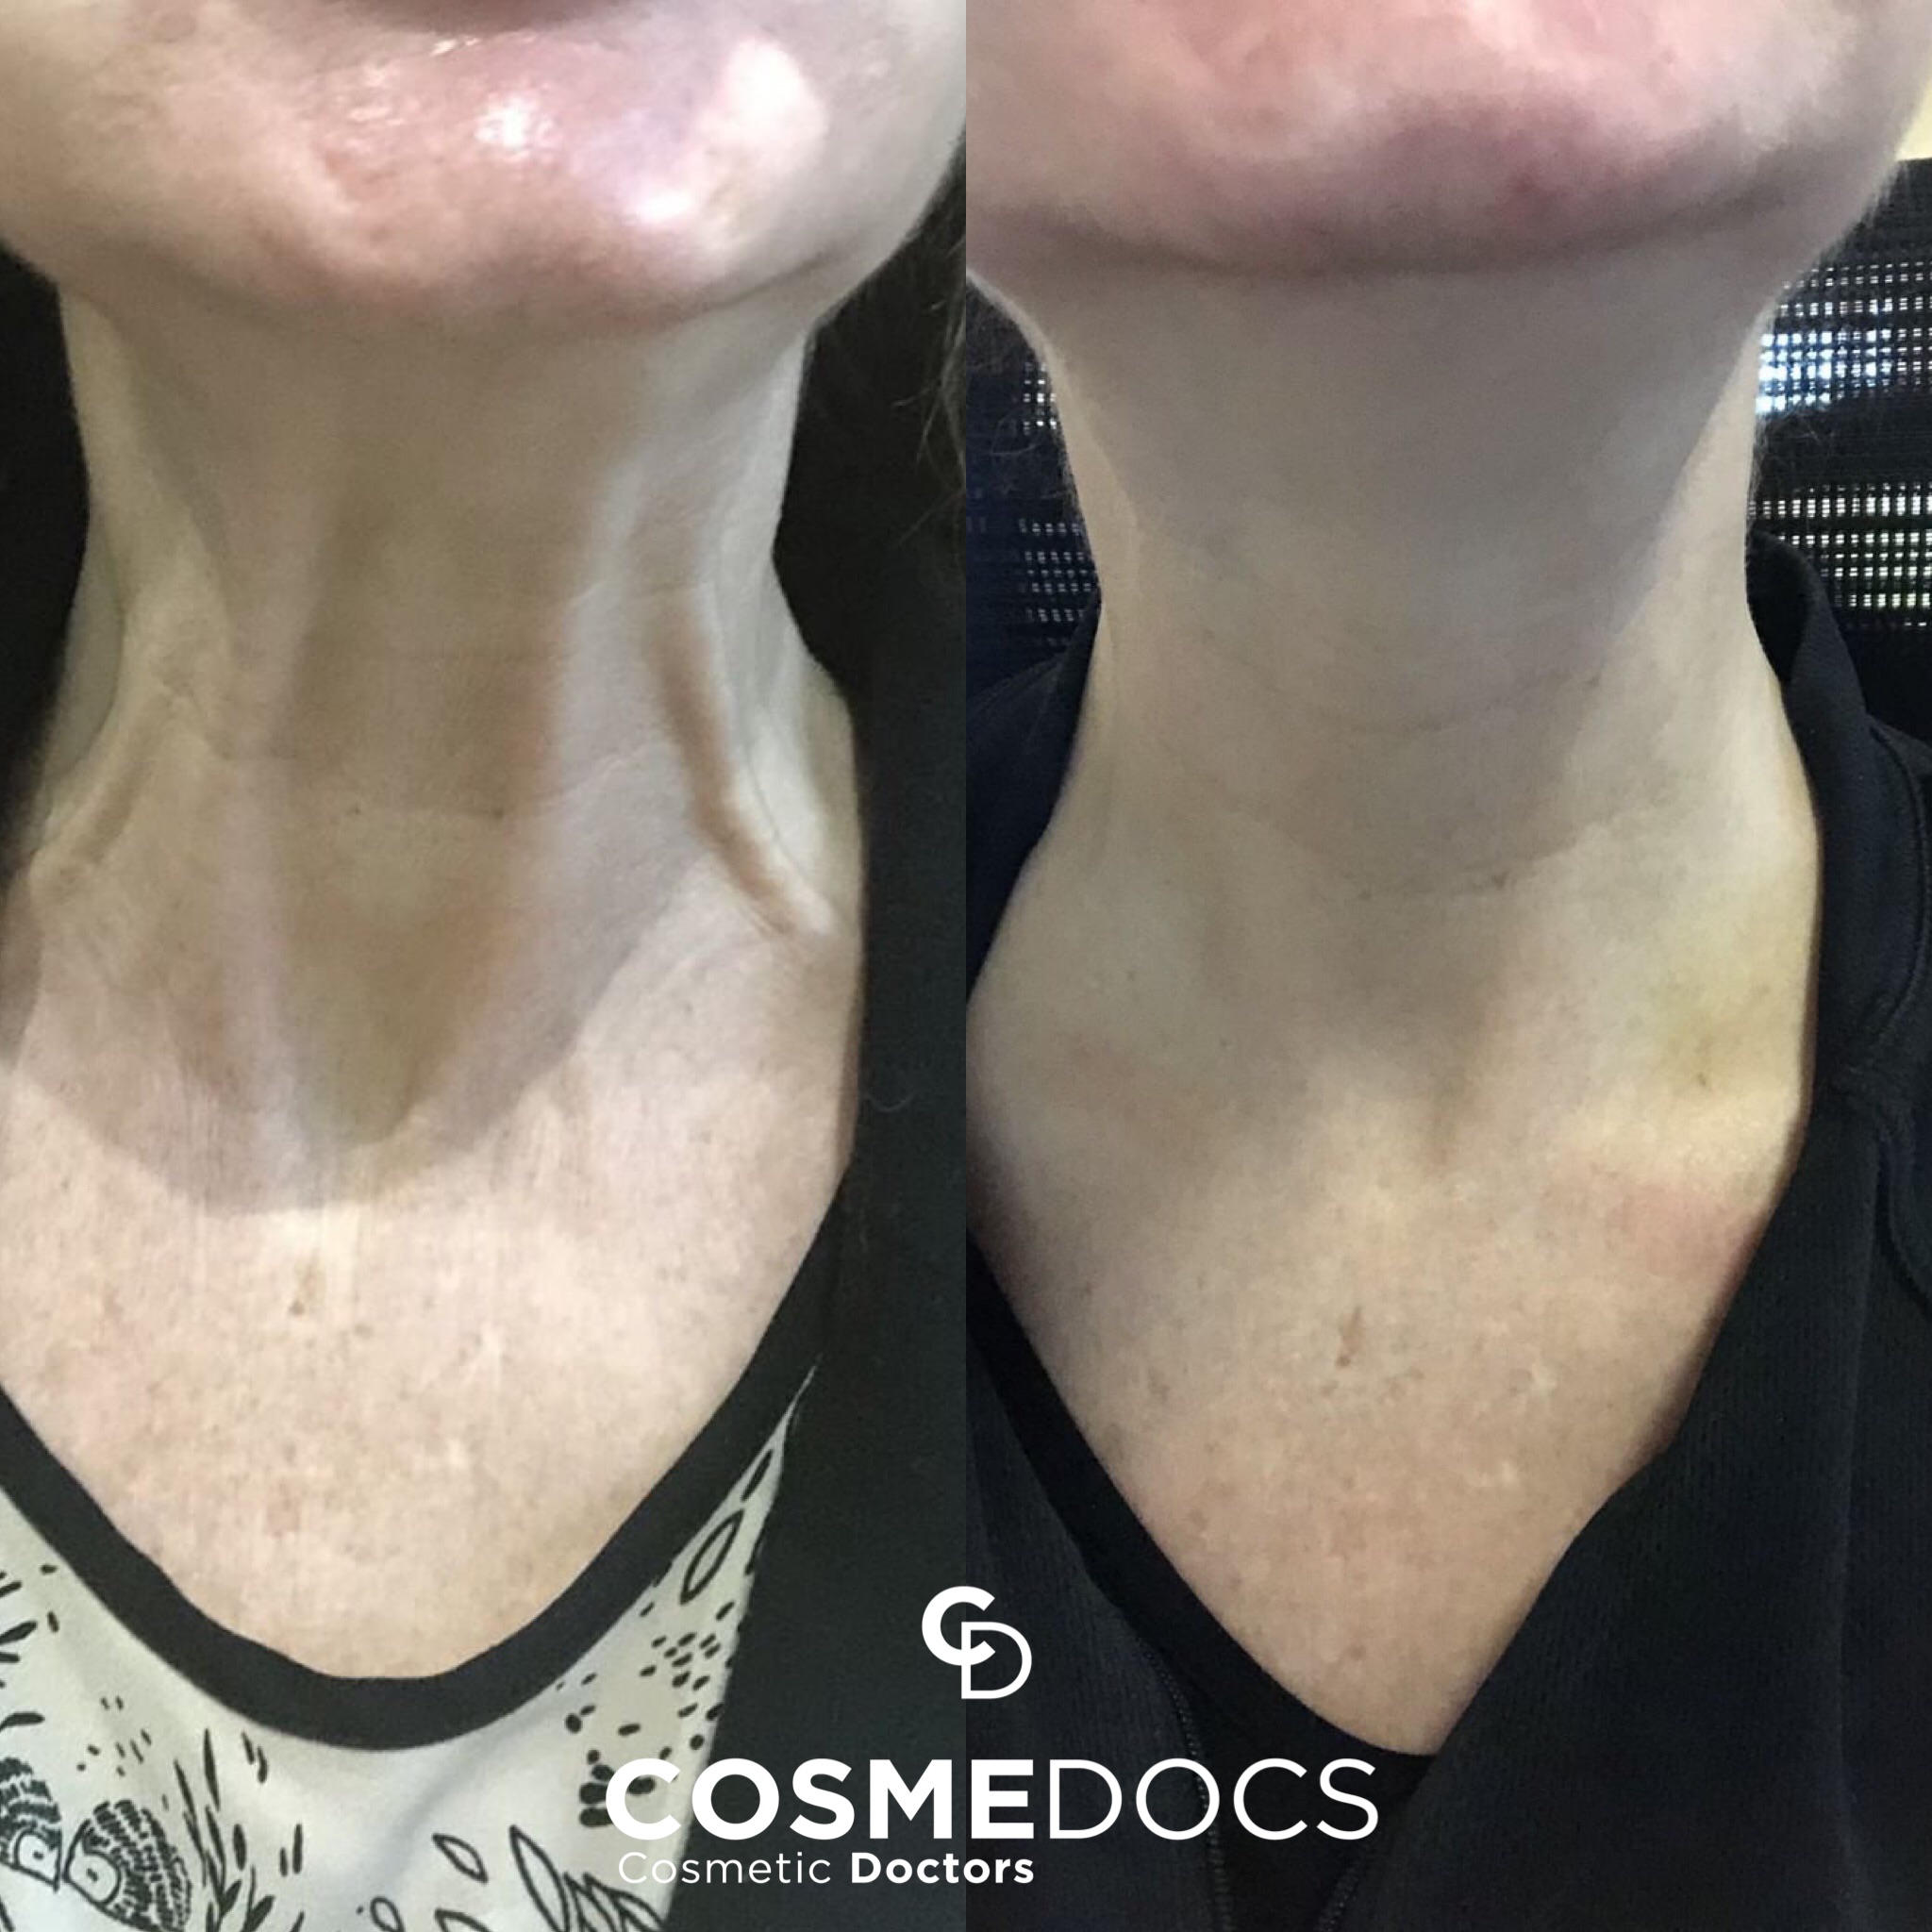 Before and after photos showing the effects of Botox in the neck, illustrating a noticeable Nefertiti Neck Lift with smoother, tighter neck skin.